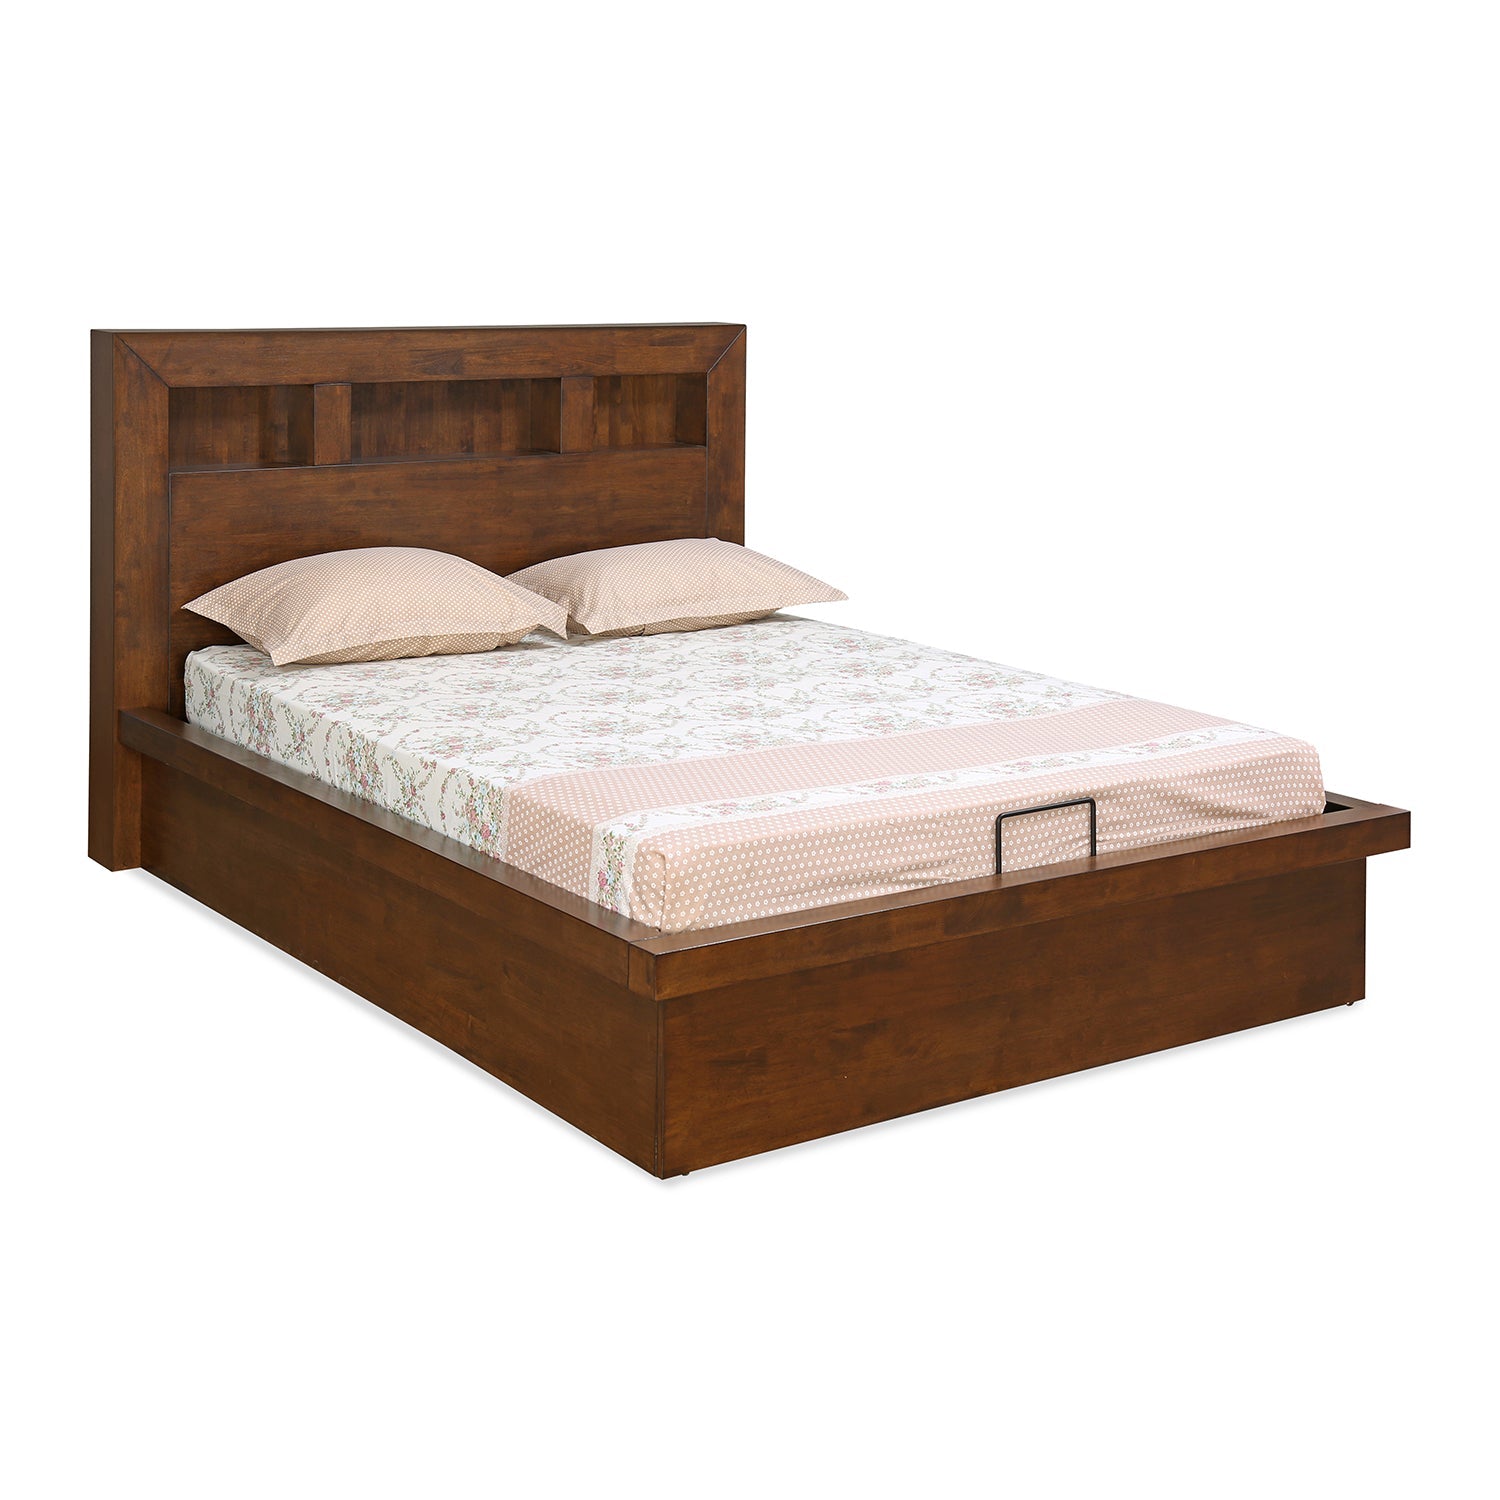 Lincoln Solid Wood Queen Bed With Hydraulic Storage (Brown)